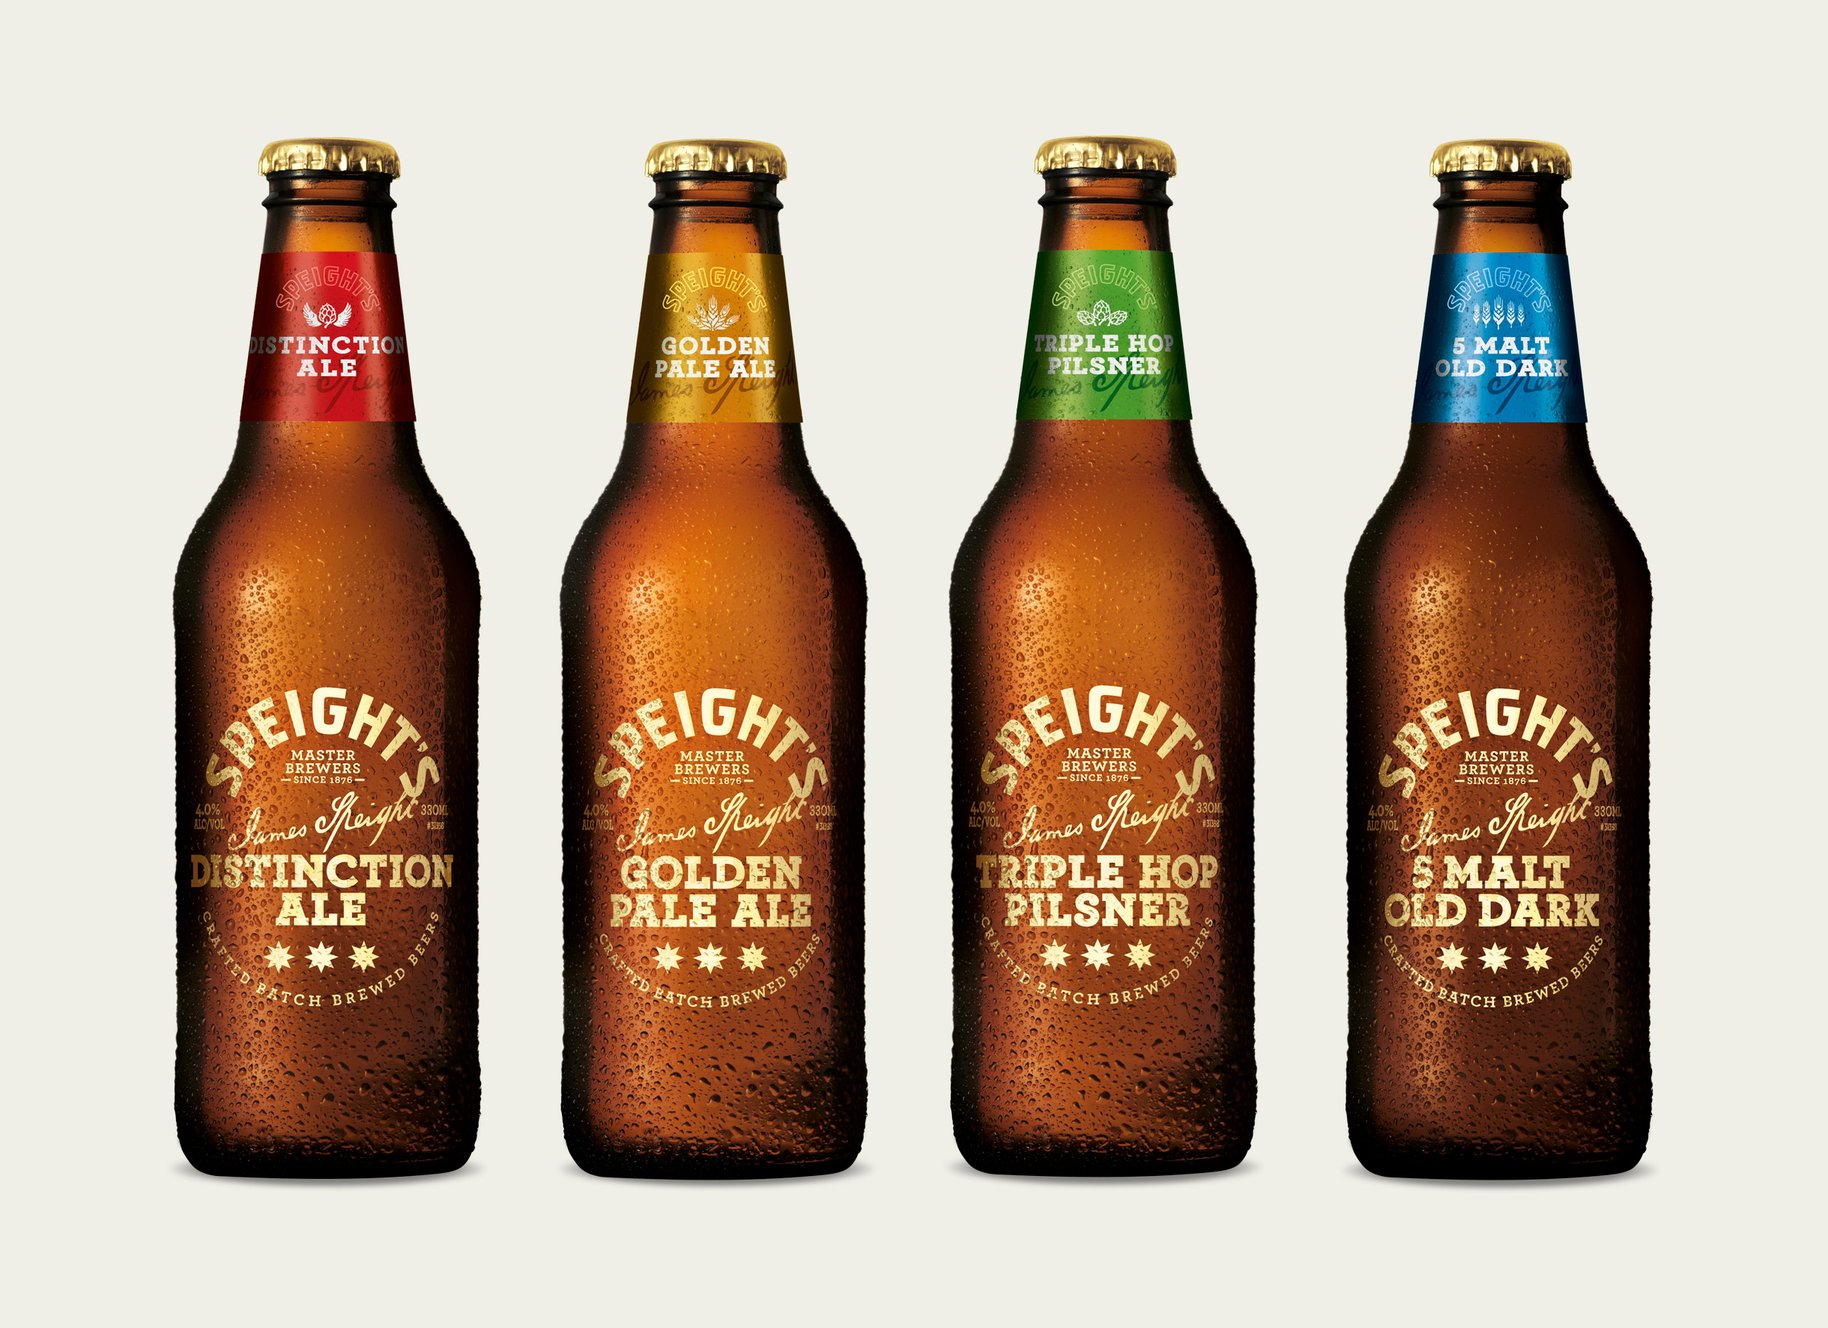 Speight's craft range packaging line up